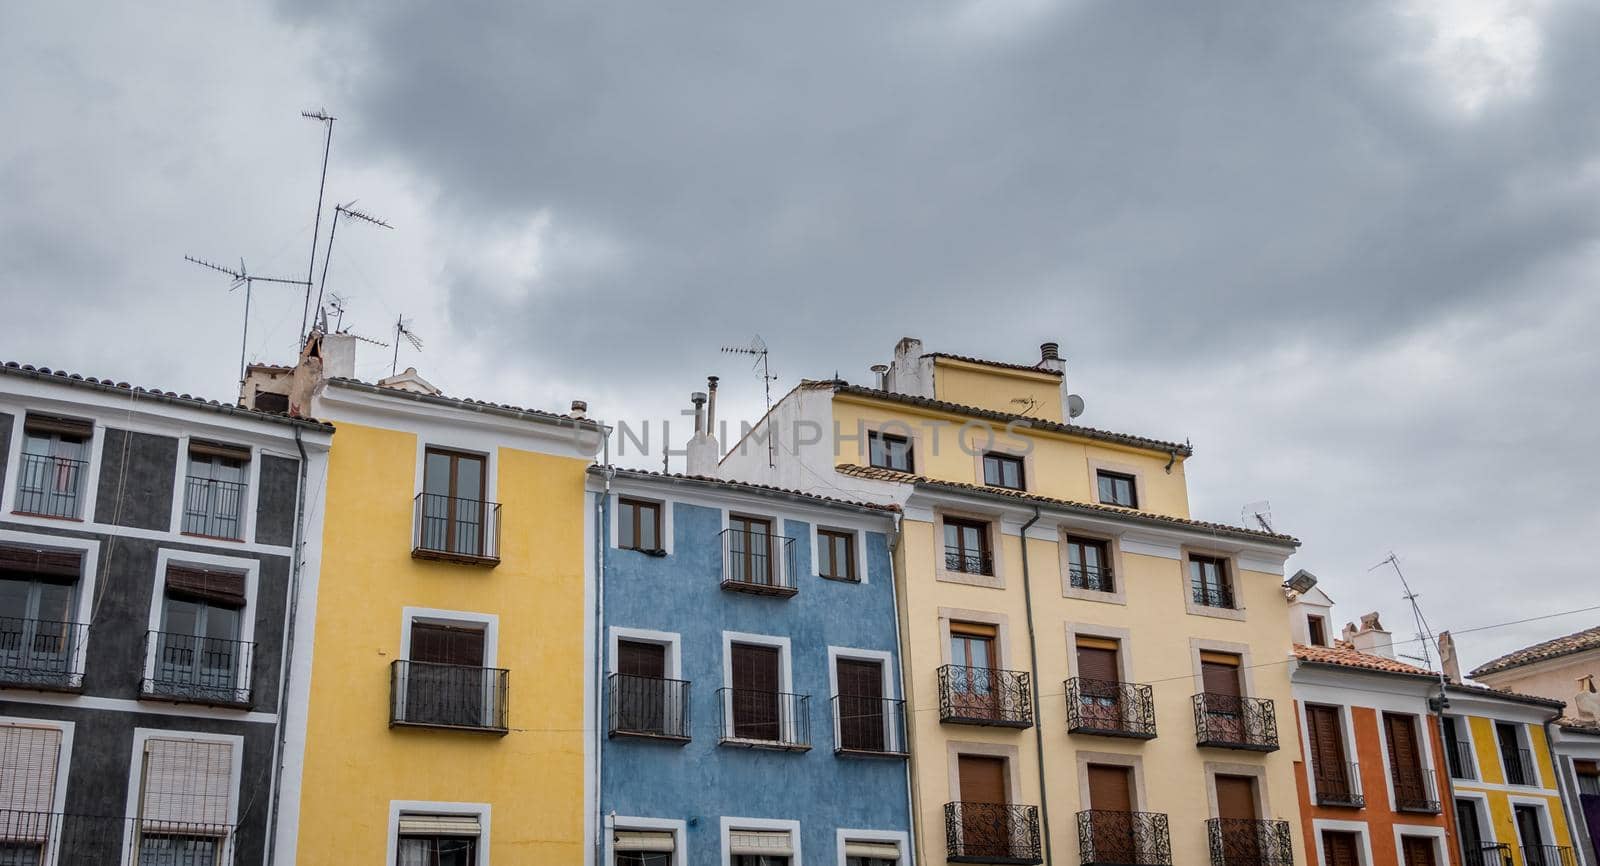 Top of colorful houses against cloudy sky